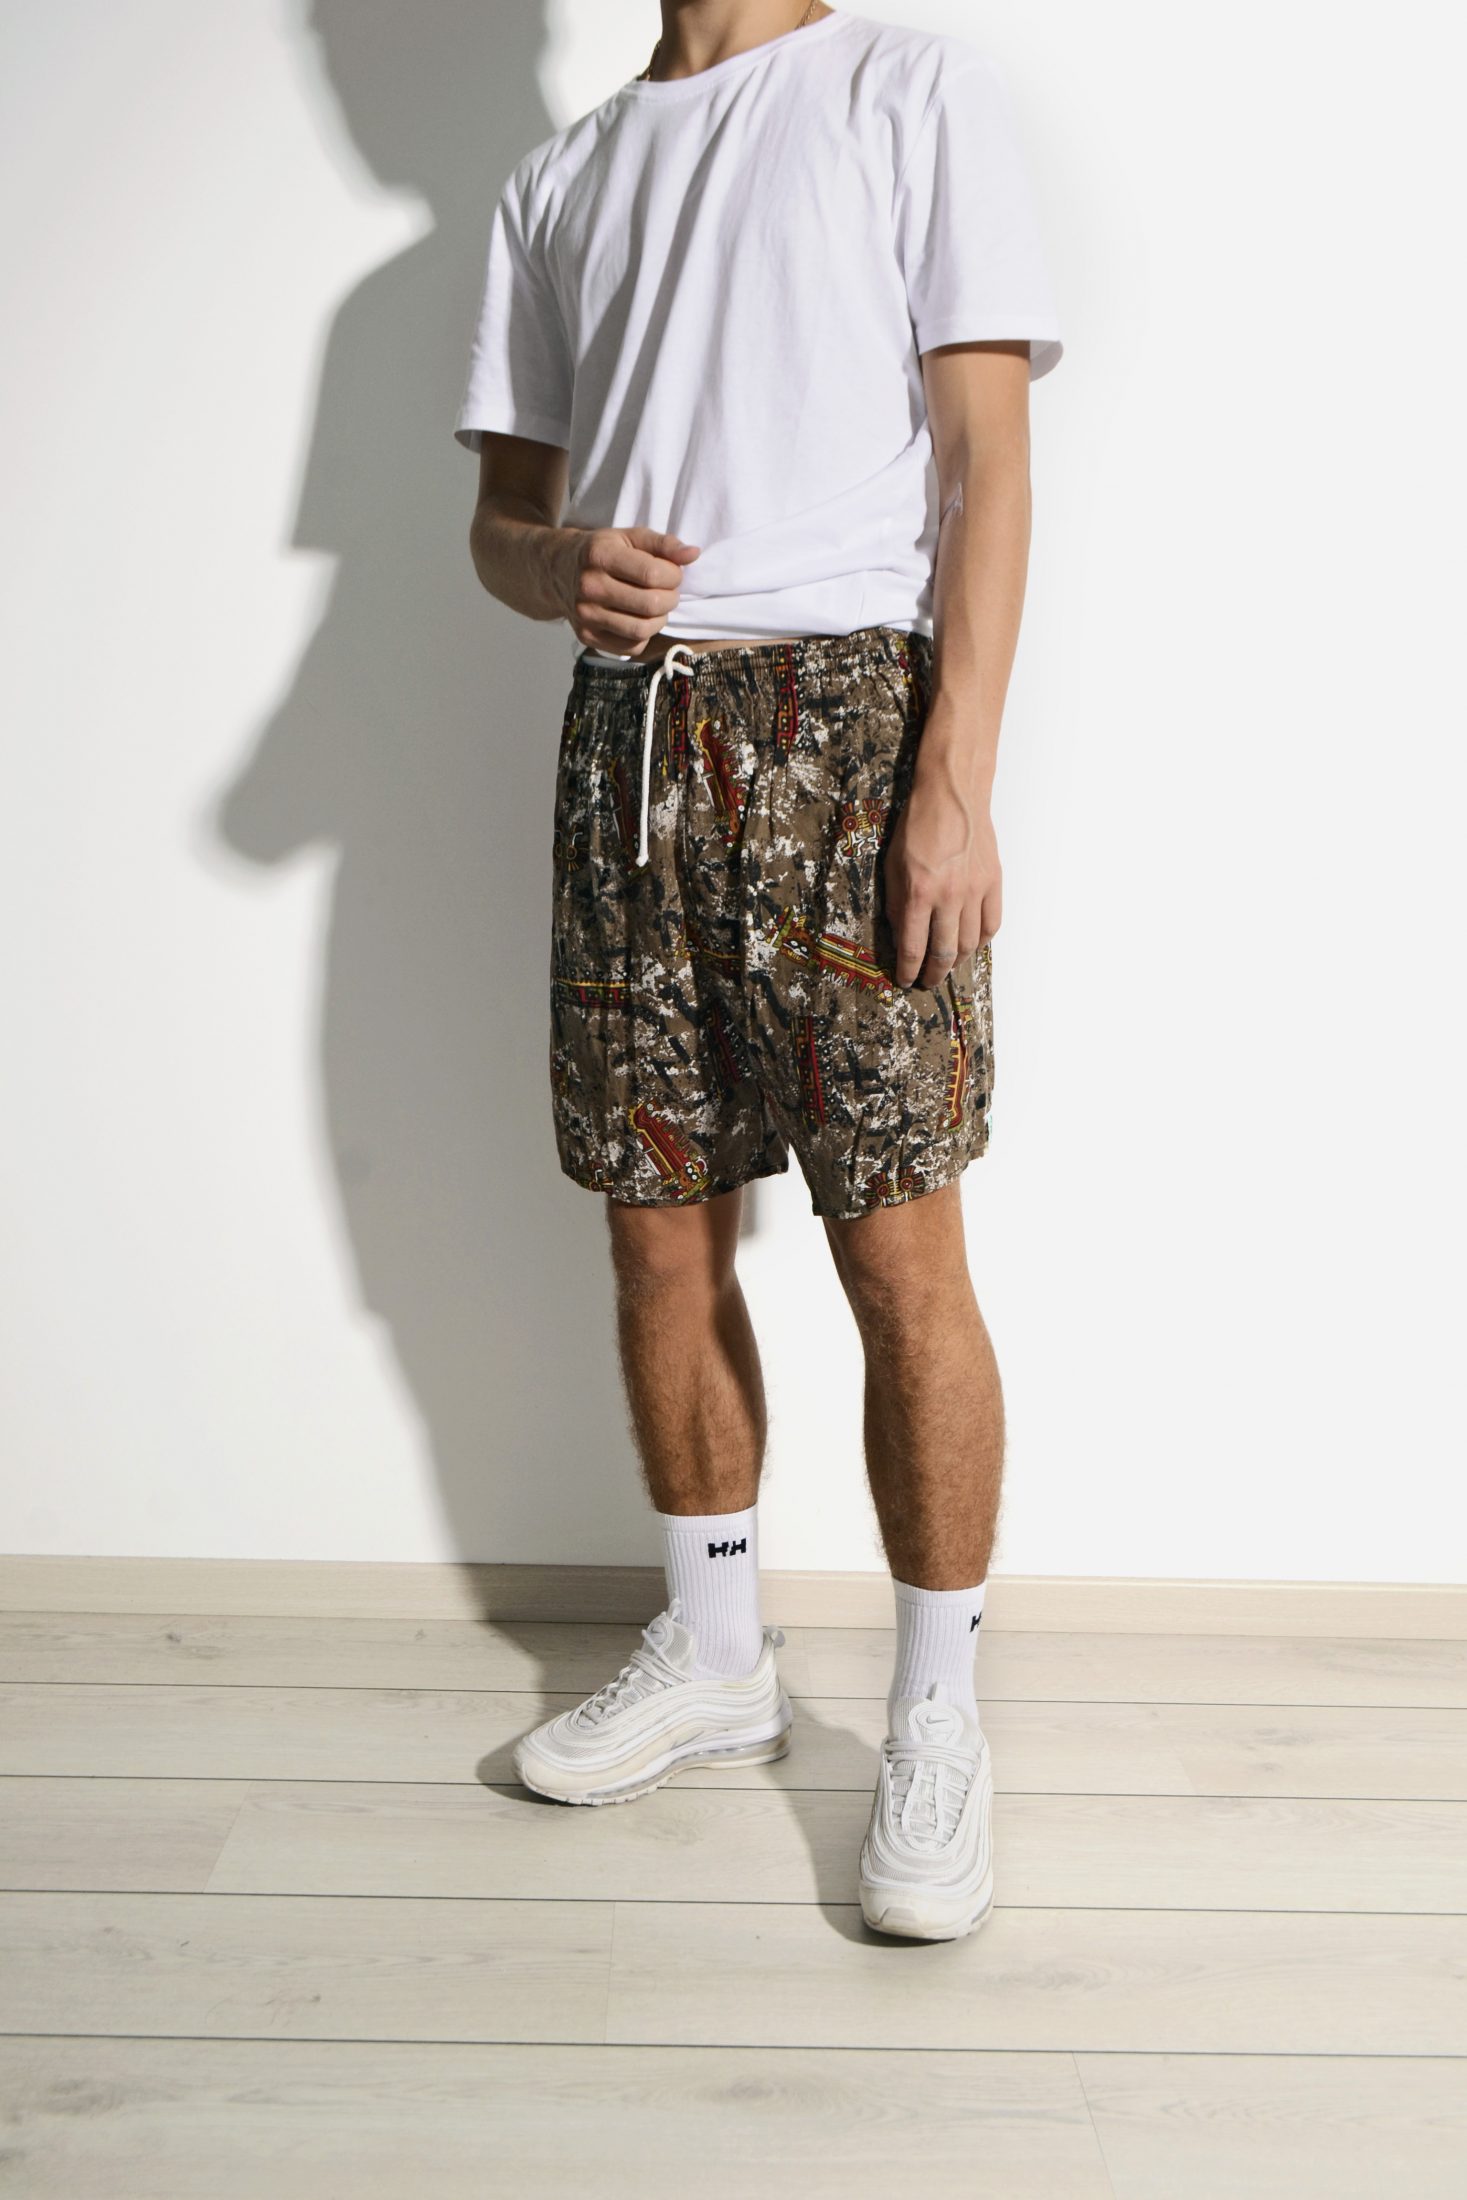 90s abstract men shorts | HOT MILK vintage clothing online